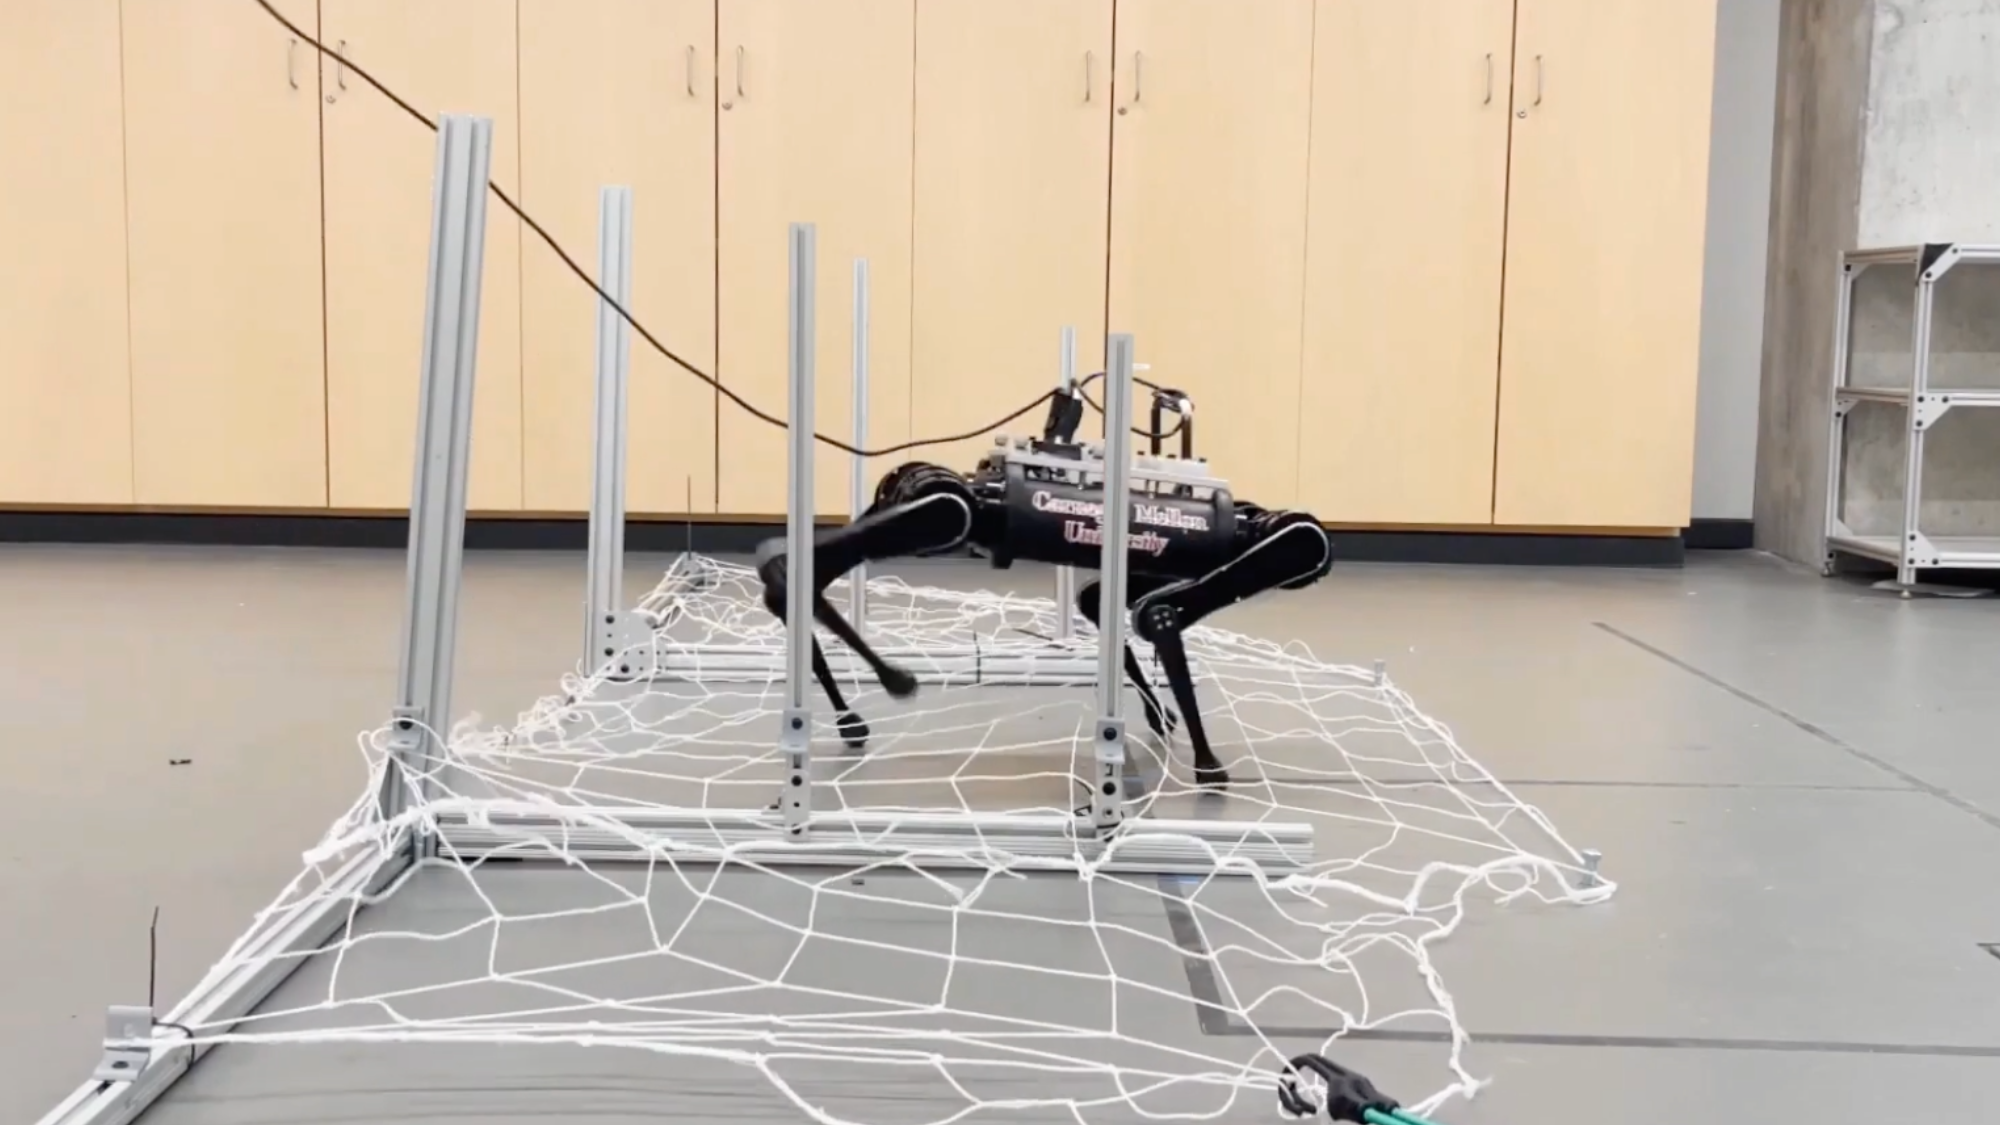 Watch robot dogs train on obstacle courses to avoid tripping